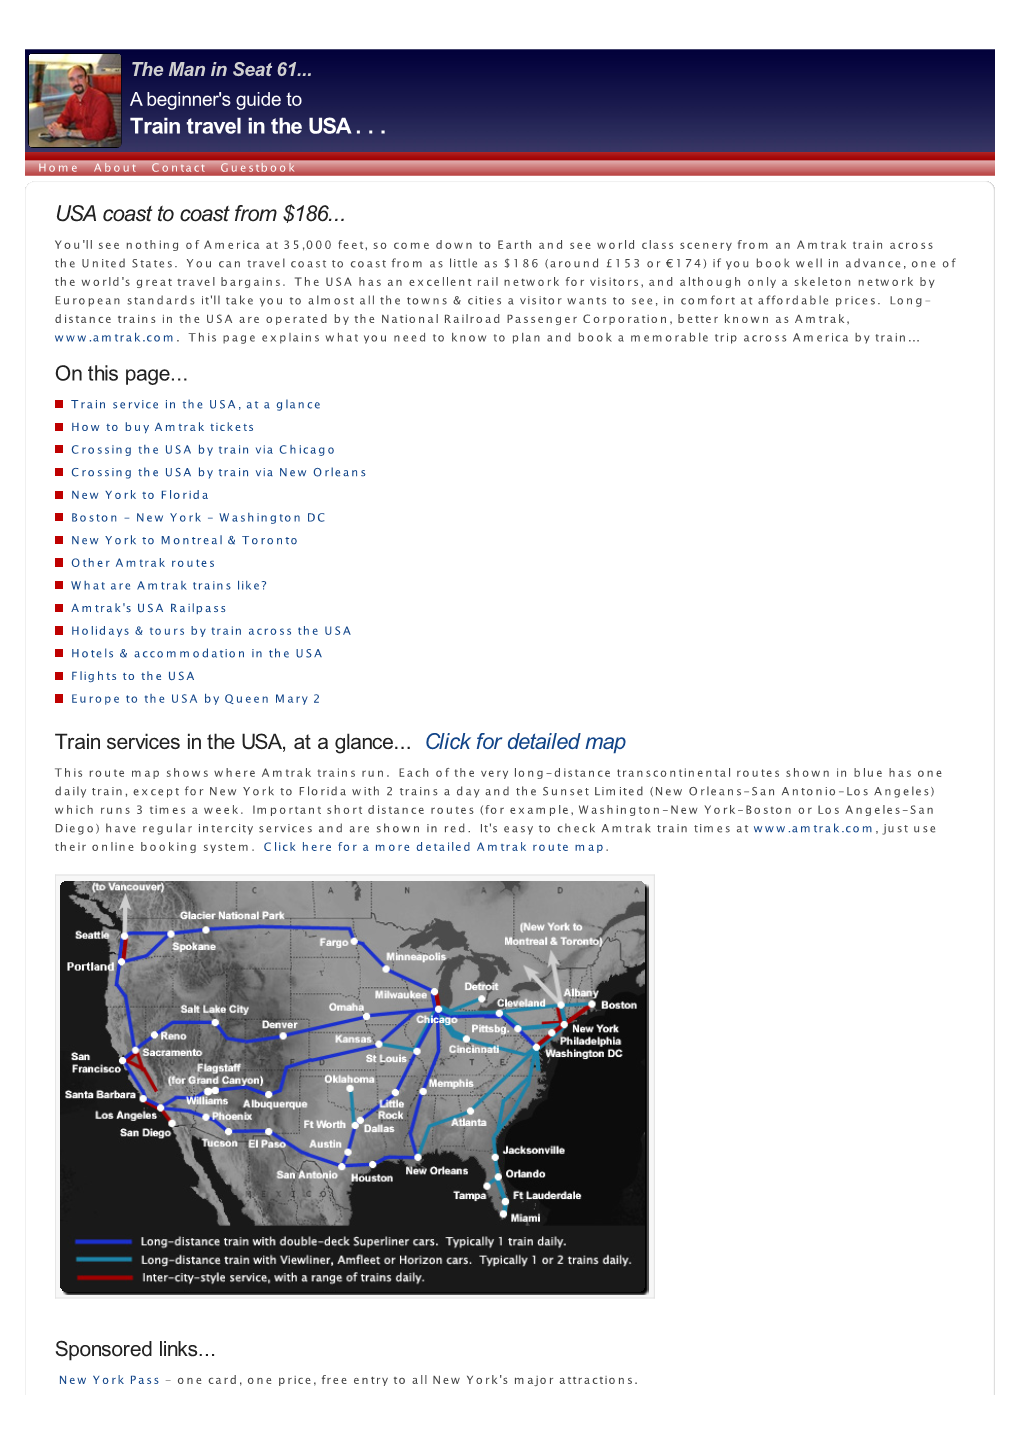 A Guide to Train Travel in the USA | Coast to Coast by Amtrak from $186